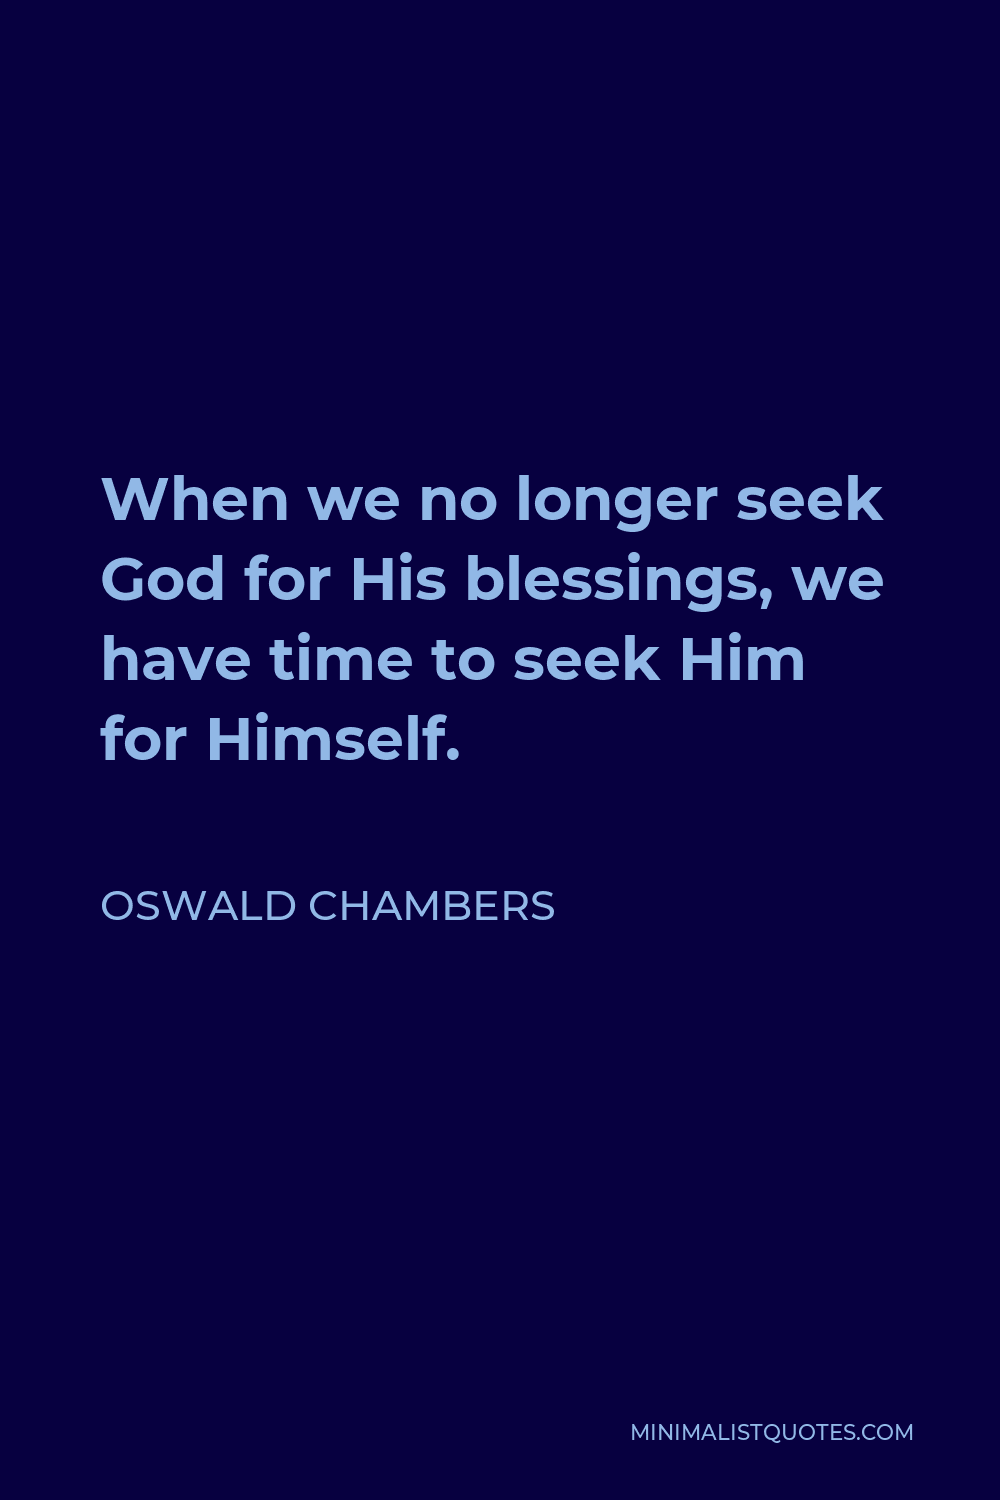 Oswald Chambers Quote - When we no longer seek God for His blessings, we have time to seek Him for Himself.